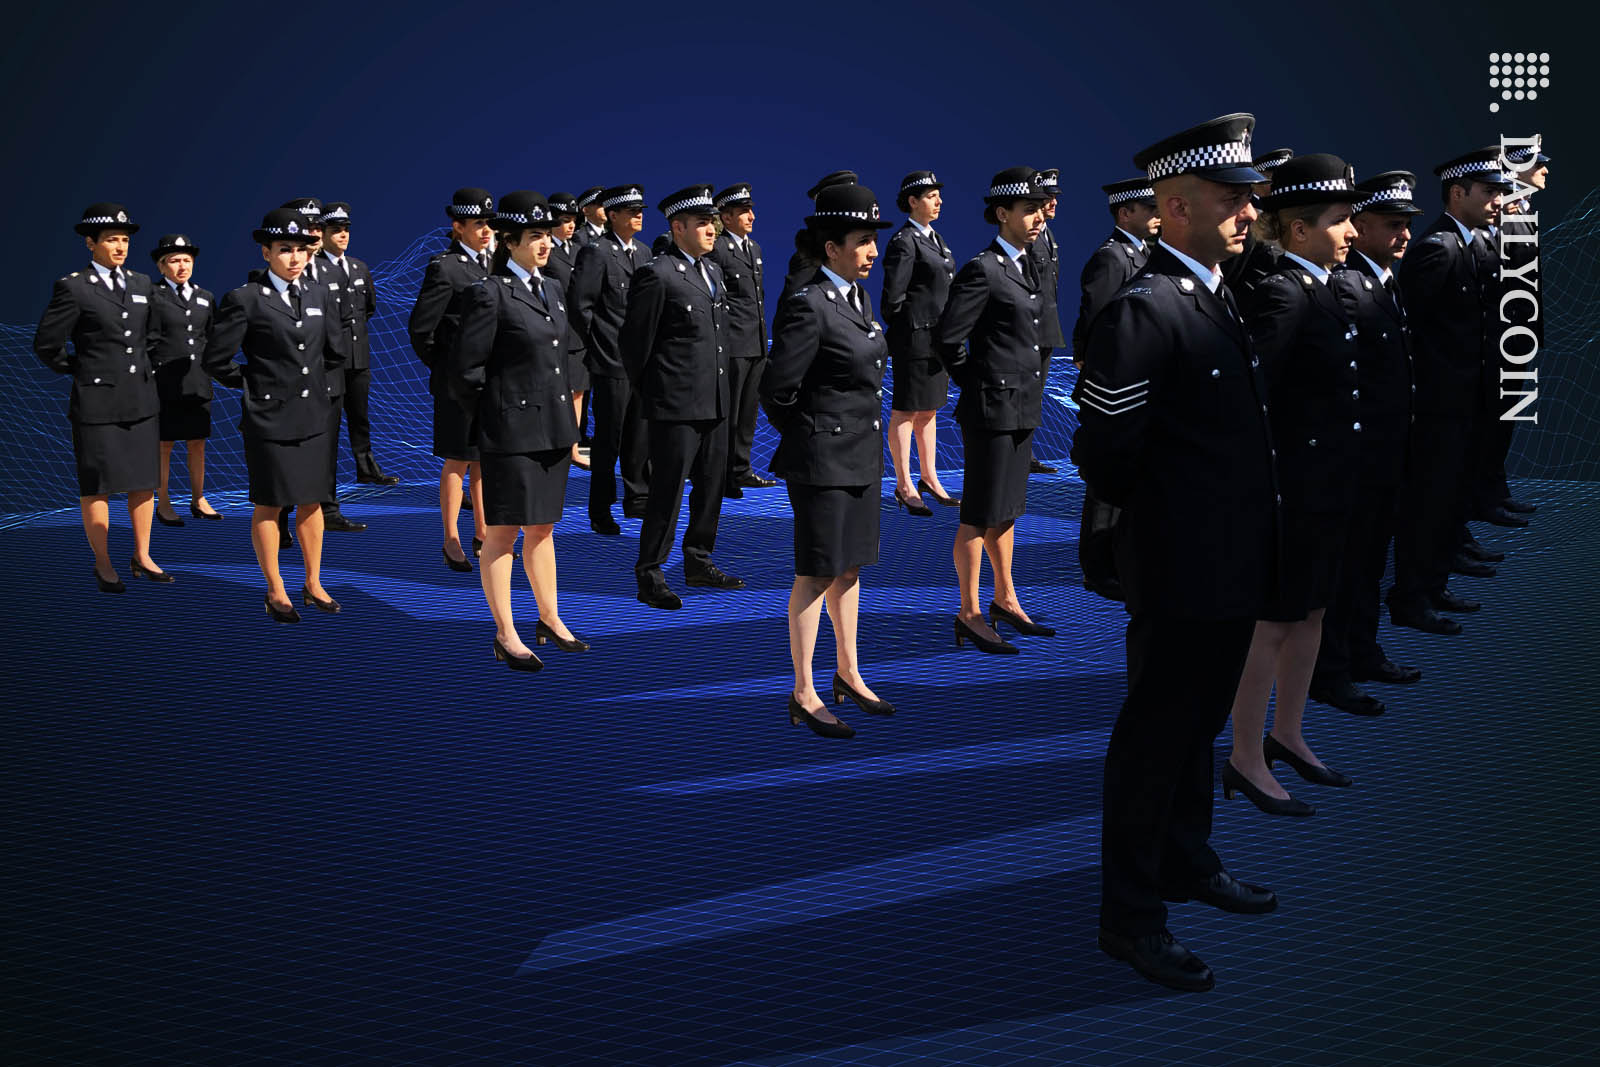 An army of Cypriot police officers lined up, reporting for duty in the metaverse.